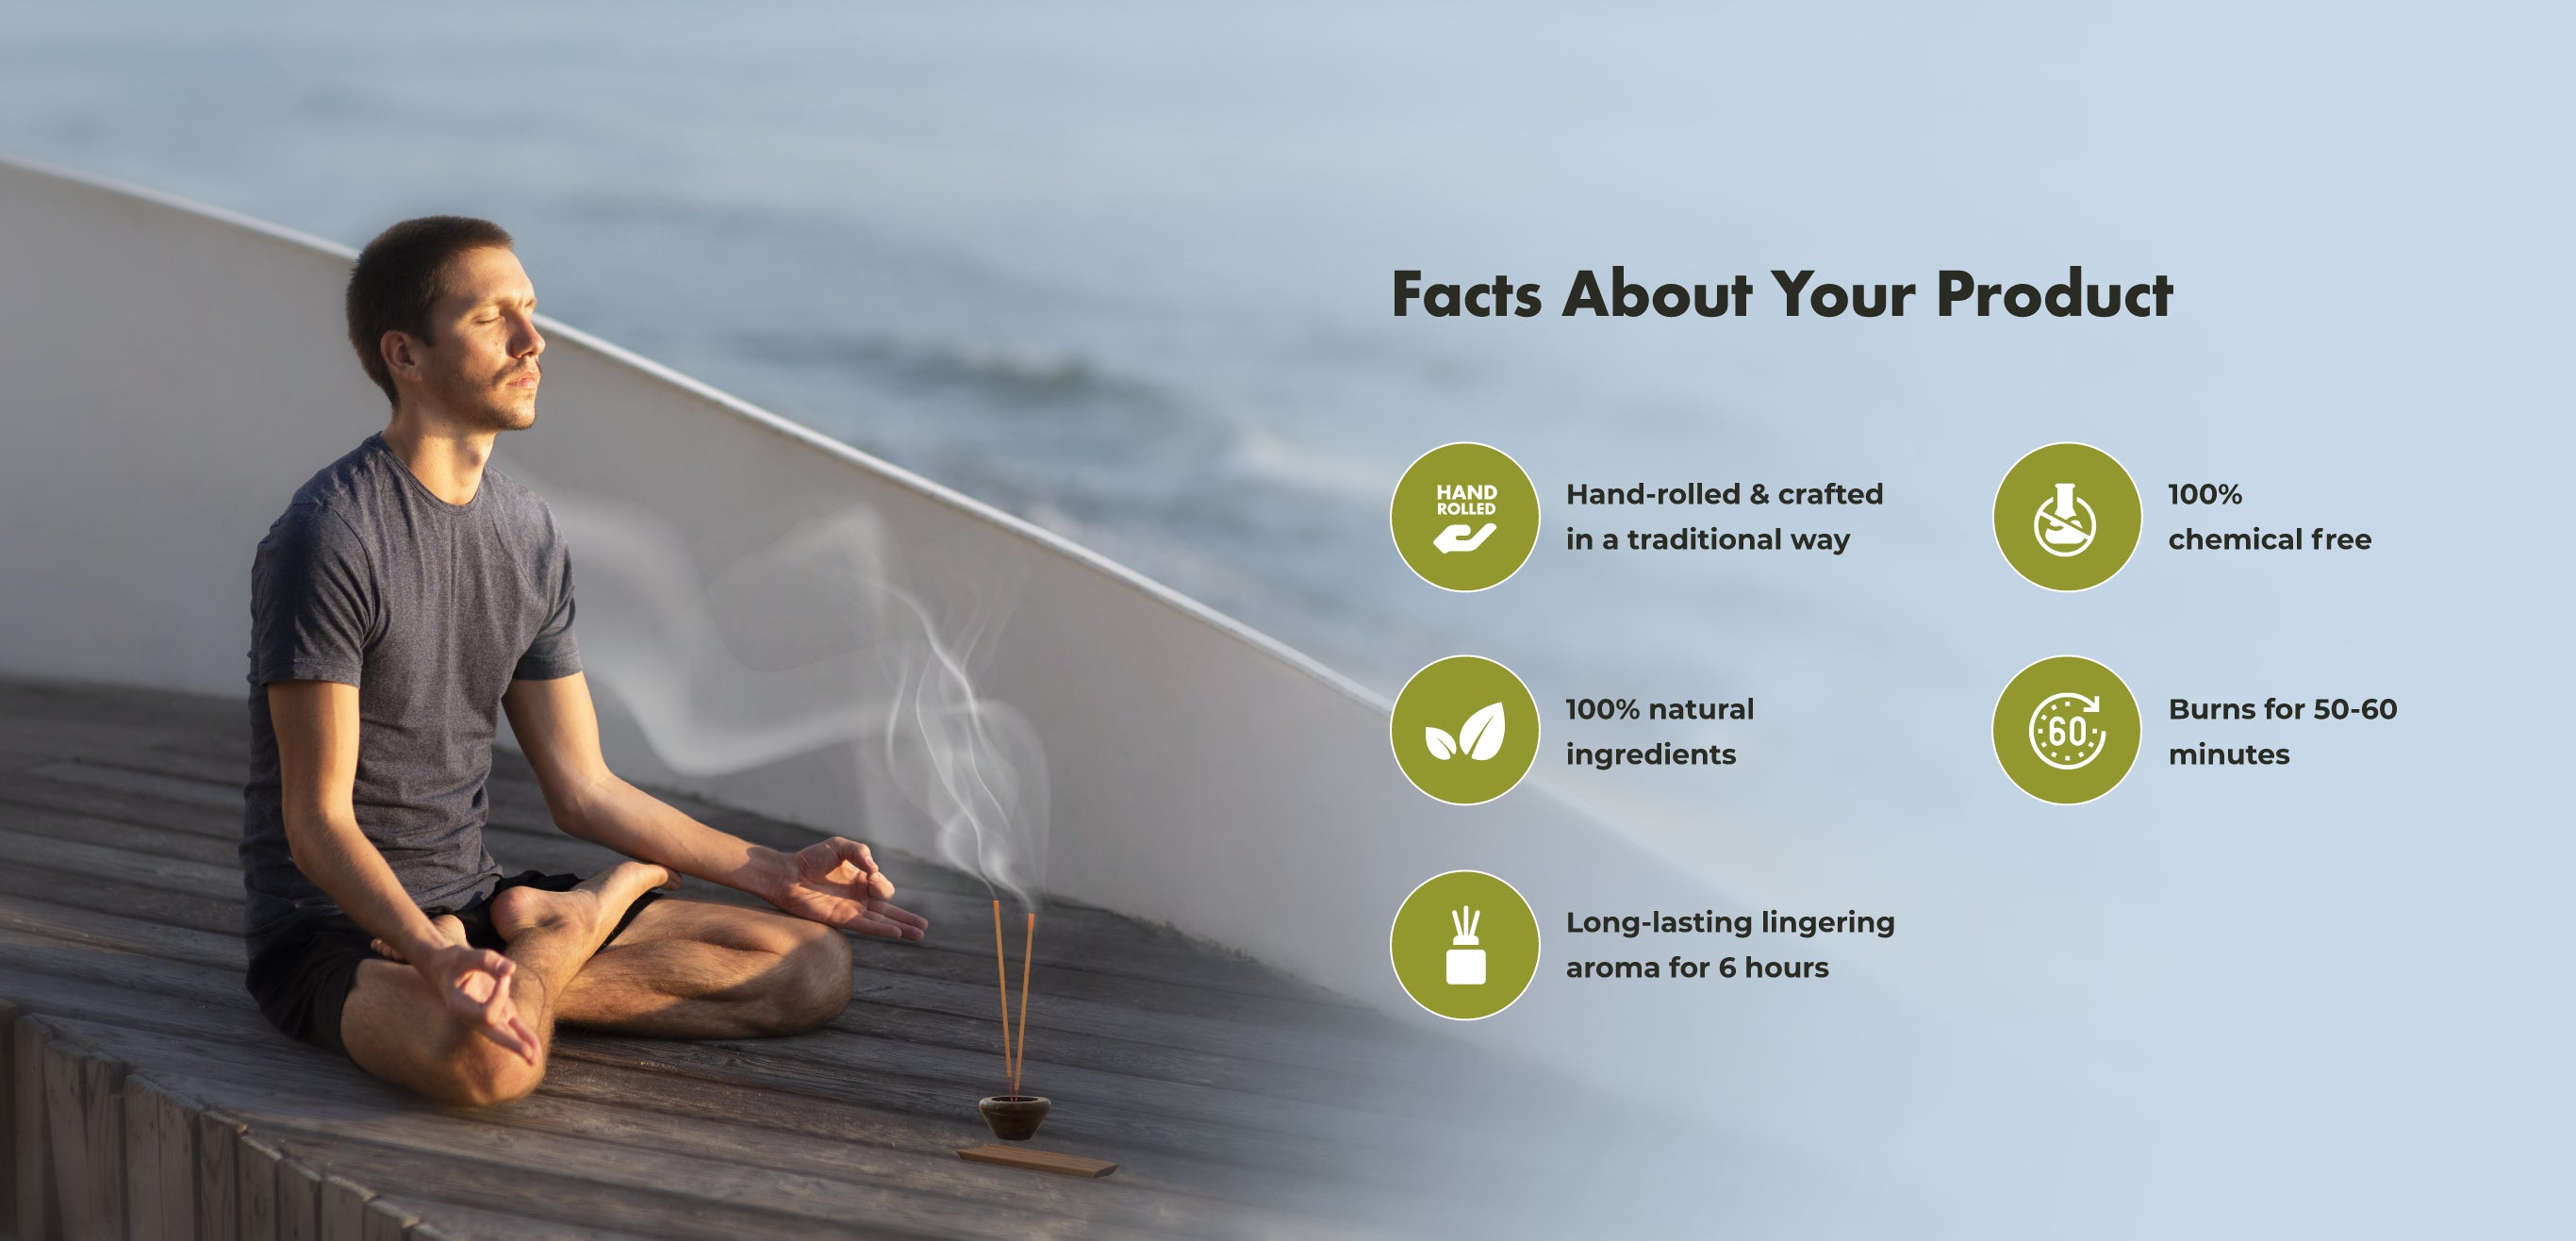 Facts About Your Product
HAND
Hand-rolled & crafted in a traditional way
100%
chemical free
100% natural ingredients
€60
Burns for 50-60 minutes
Long-lasting lingering aroma for 6 hours